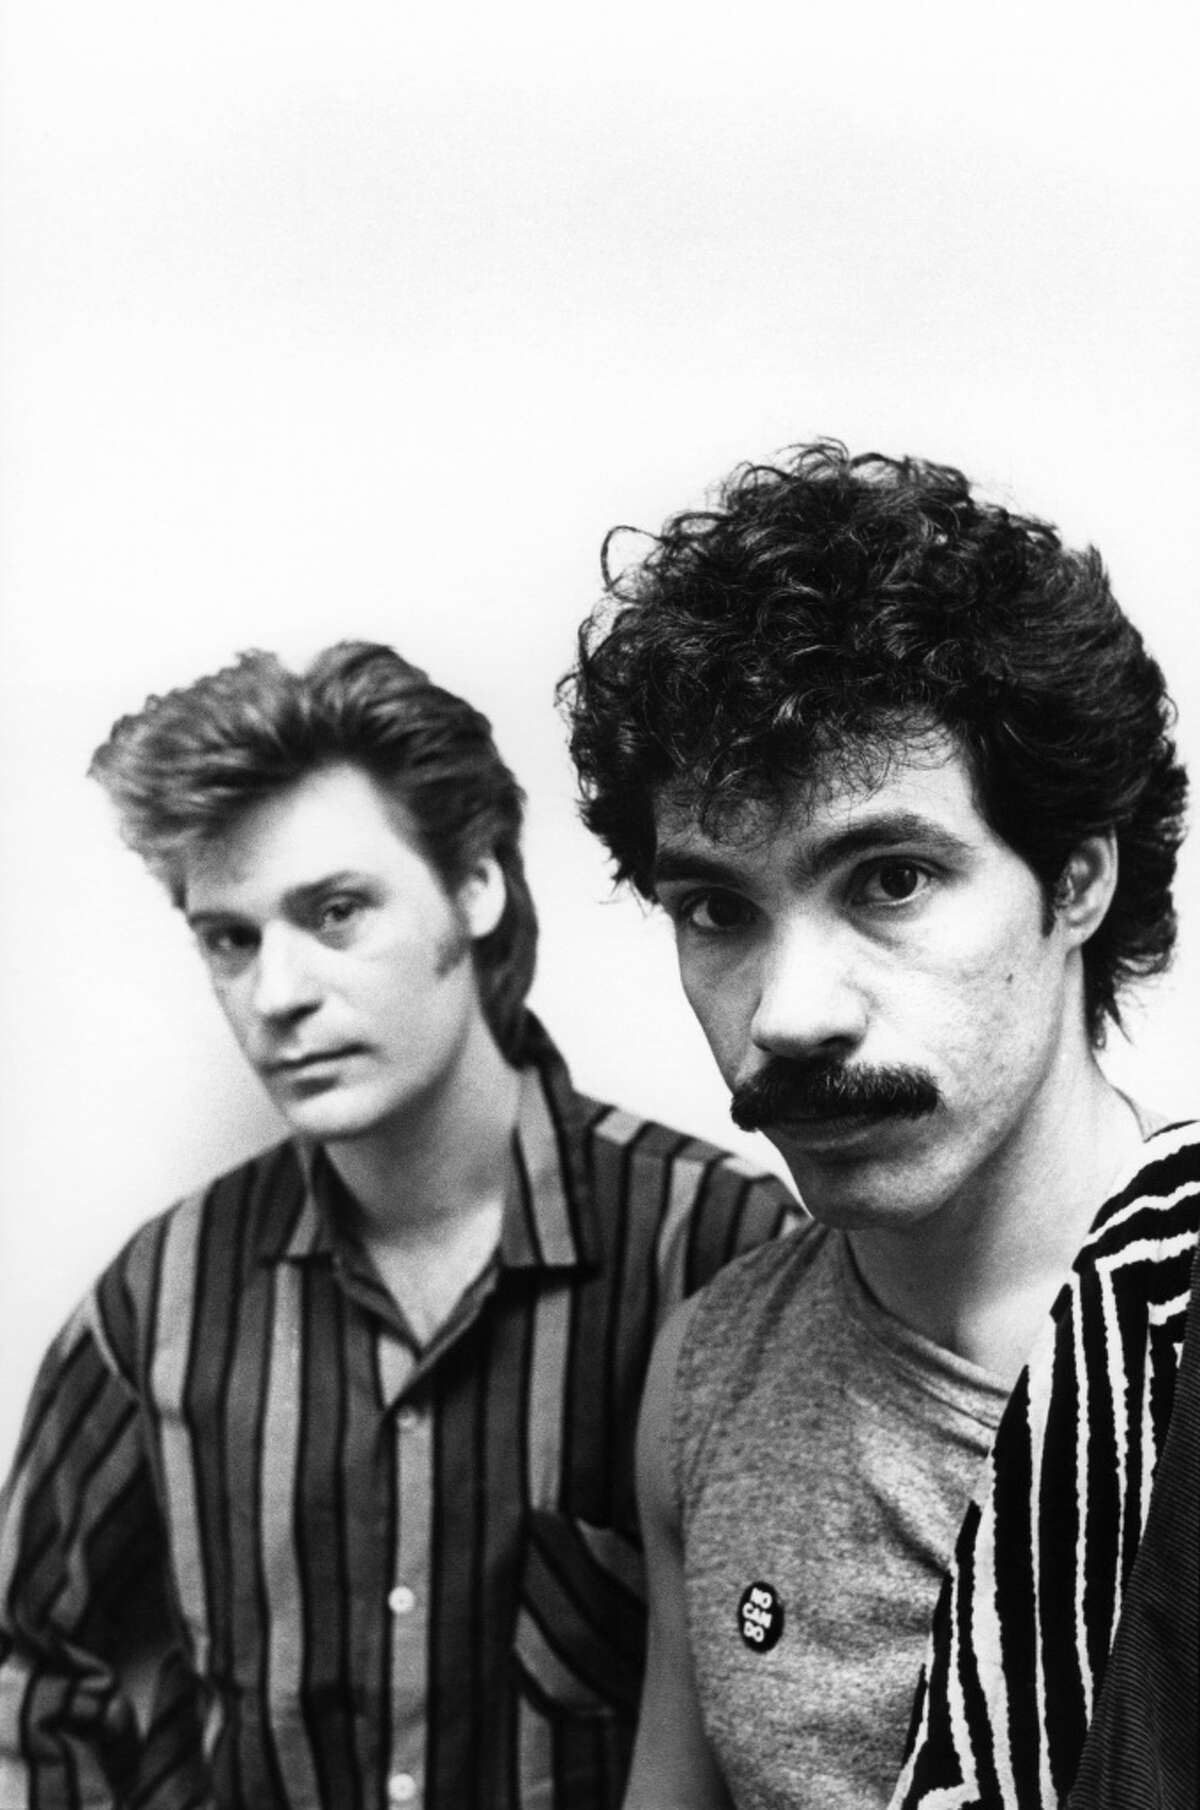 Hall and Oates through the years